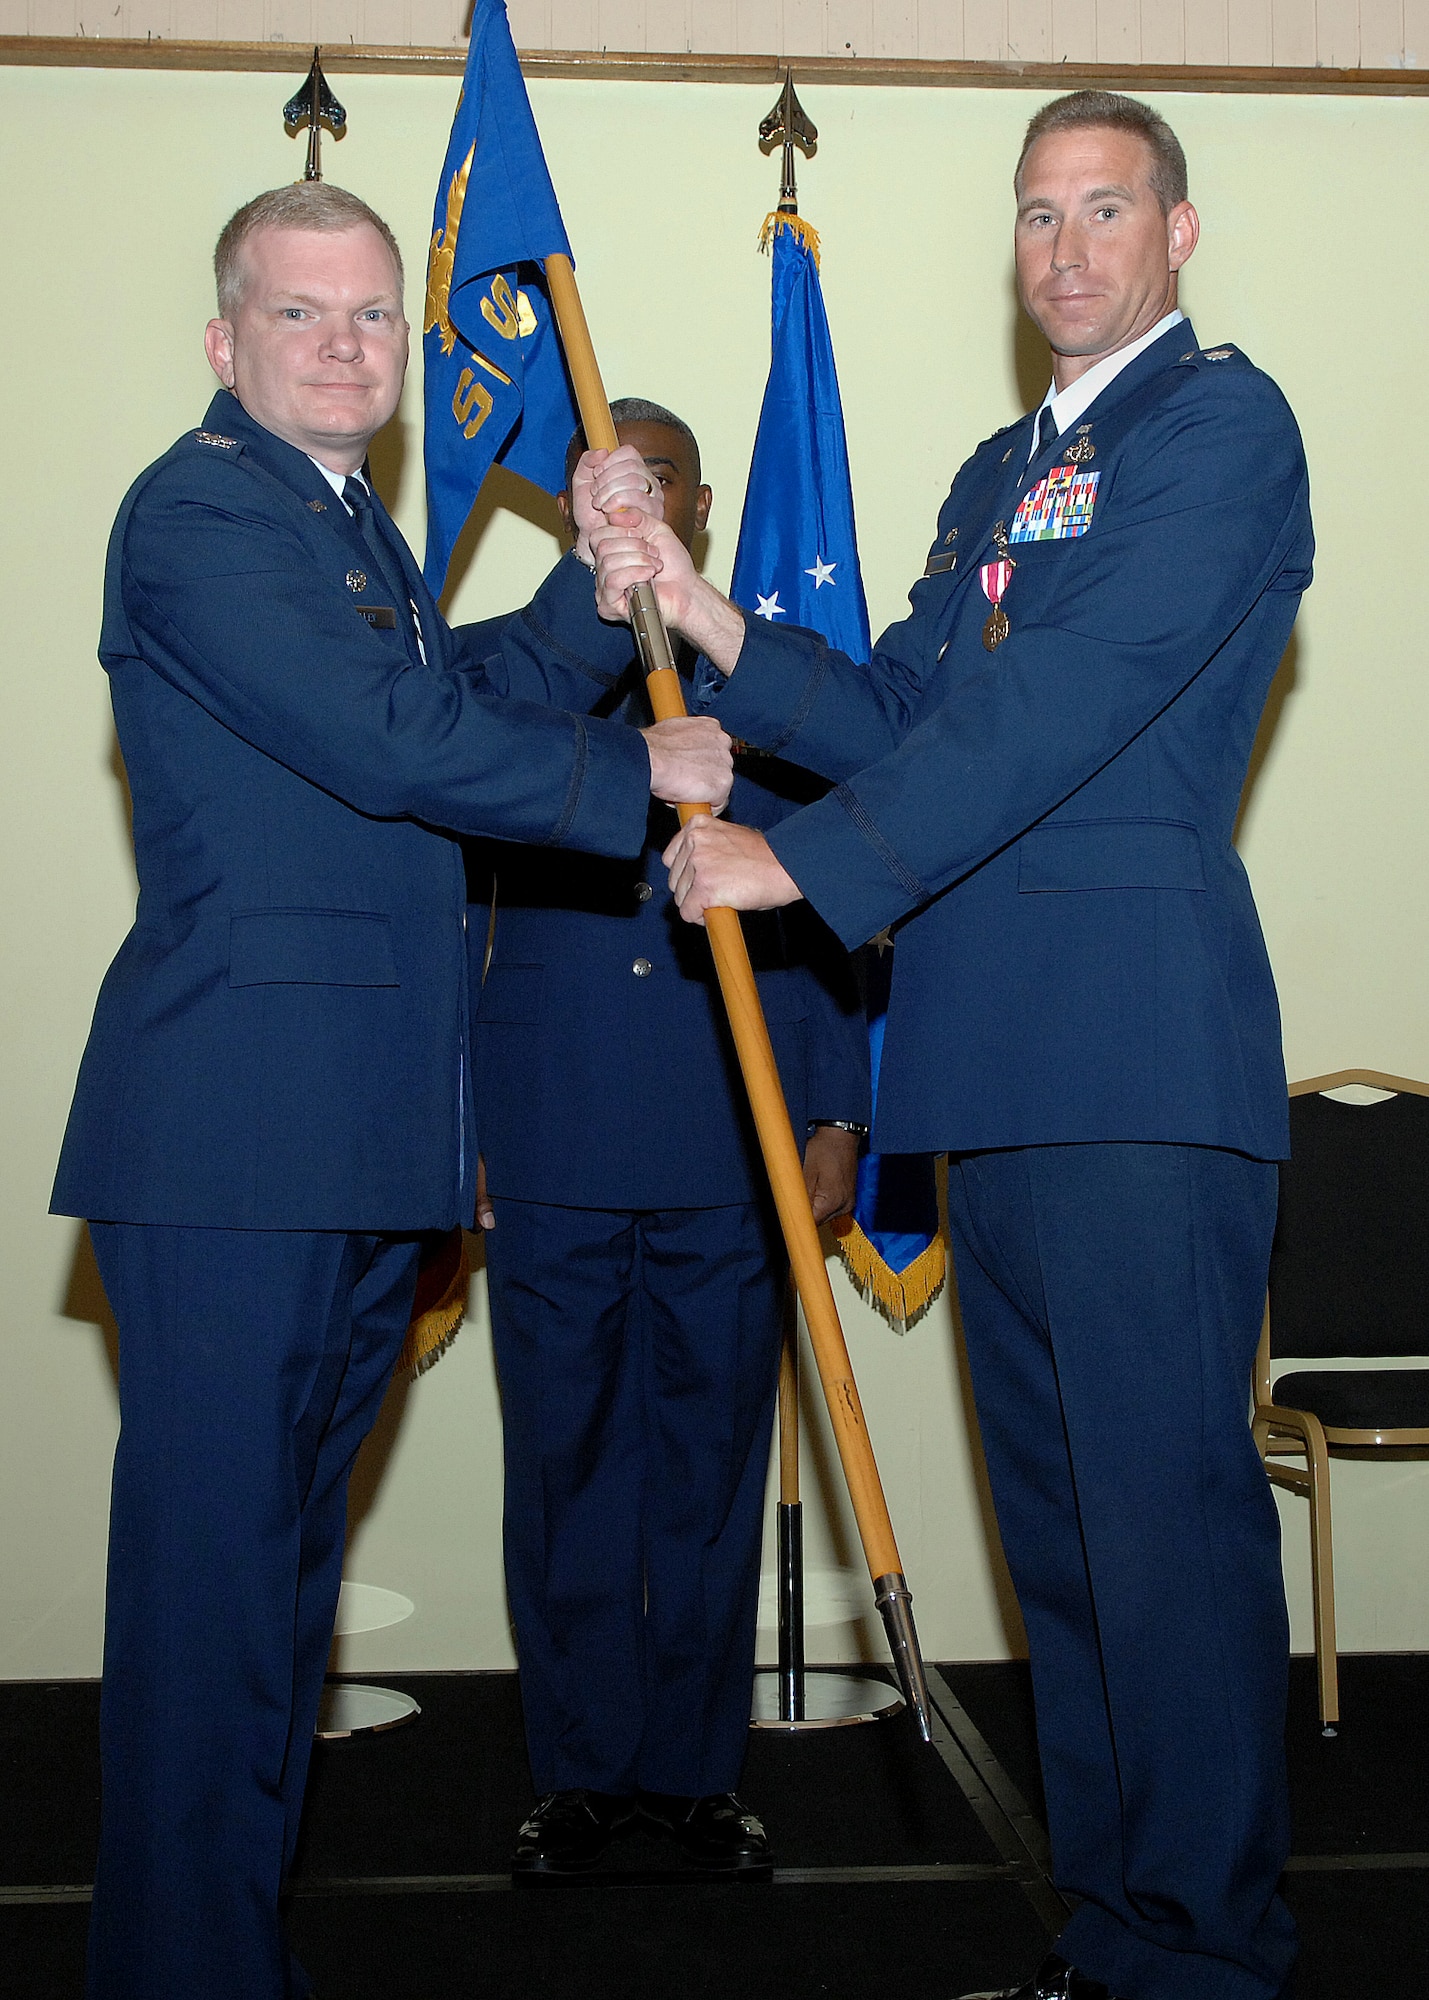 Lt. Col. Alex Gaines 36th Serivces Squadron commander passes off the 36th SVS guidon to Col. Mark Talley 36th Mission Support Group commander relinquishing command and deactivation the squadron July 1 here. The 36th SVS and the 36th Mission Support Squadron were both deactivated and merged creating the 36th Force Support Squadron.(U.S. Air Force by Airman 1st Class Nichelle Griffiths) 